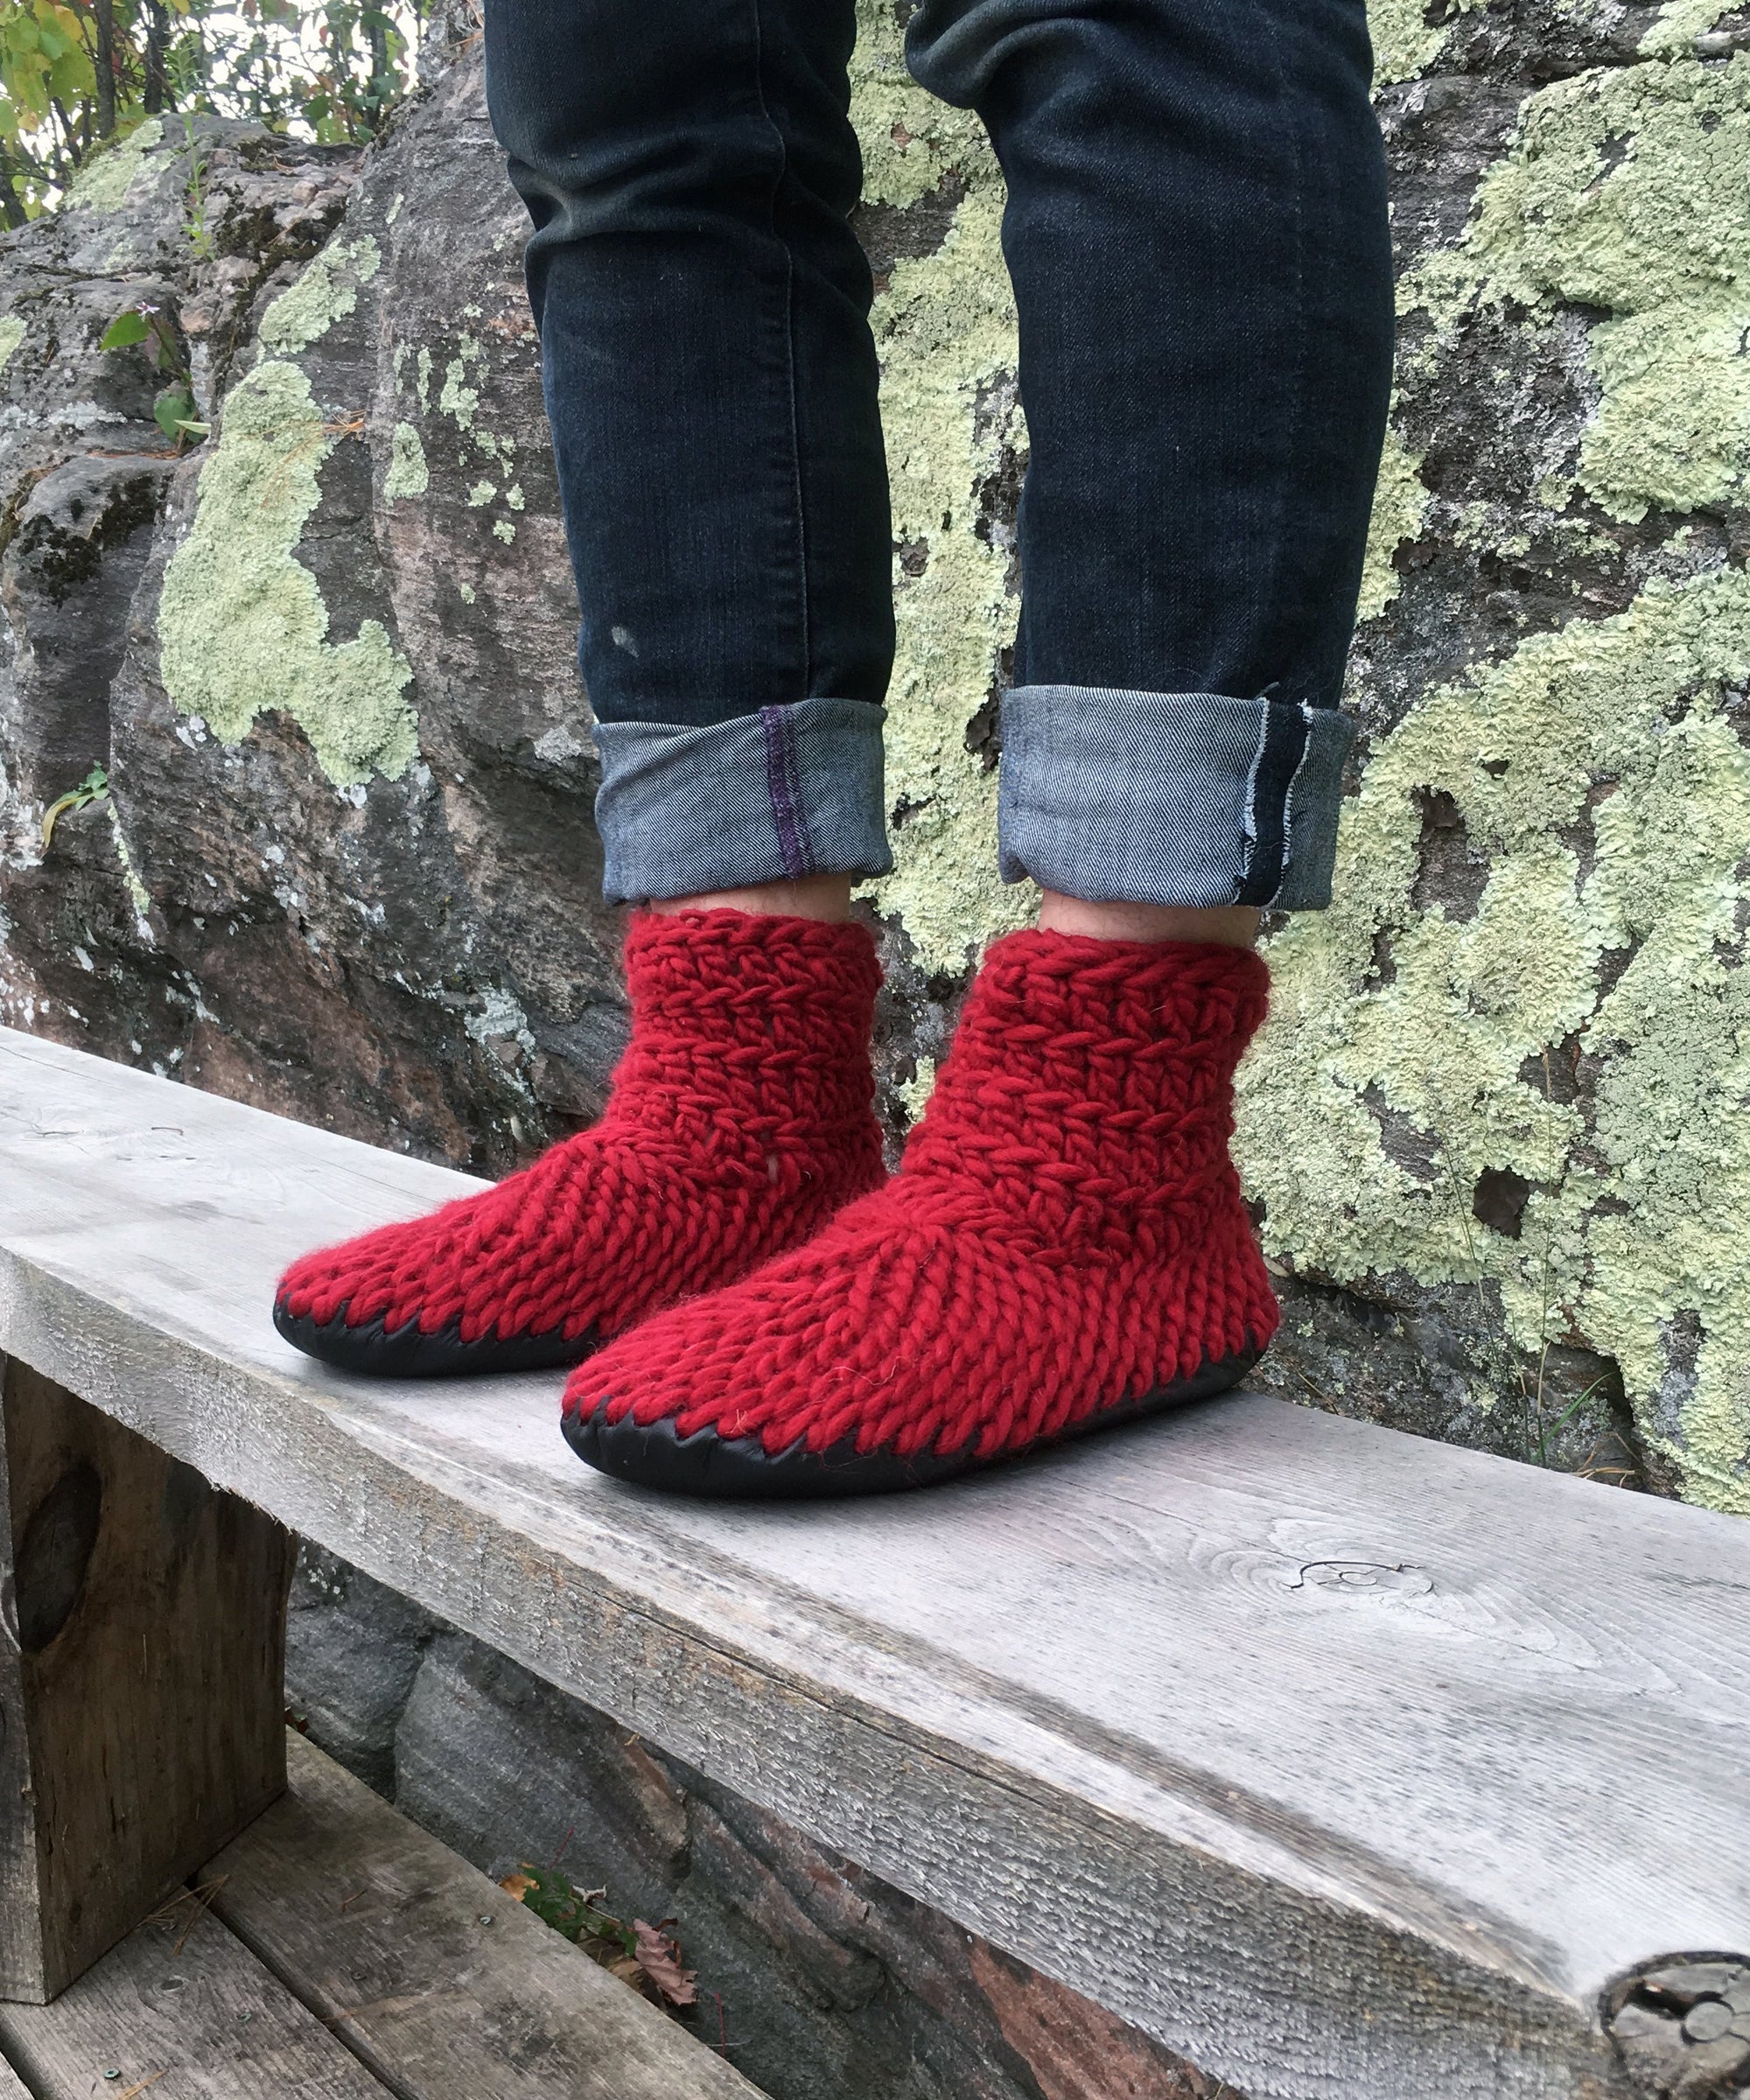 Demi-Boot: Cranberry, Red Merino Wool Bootie Slipper with Leather Sole